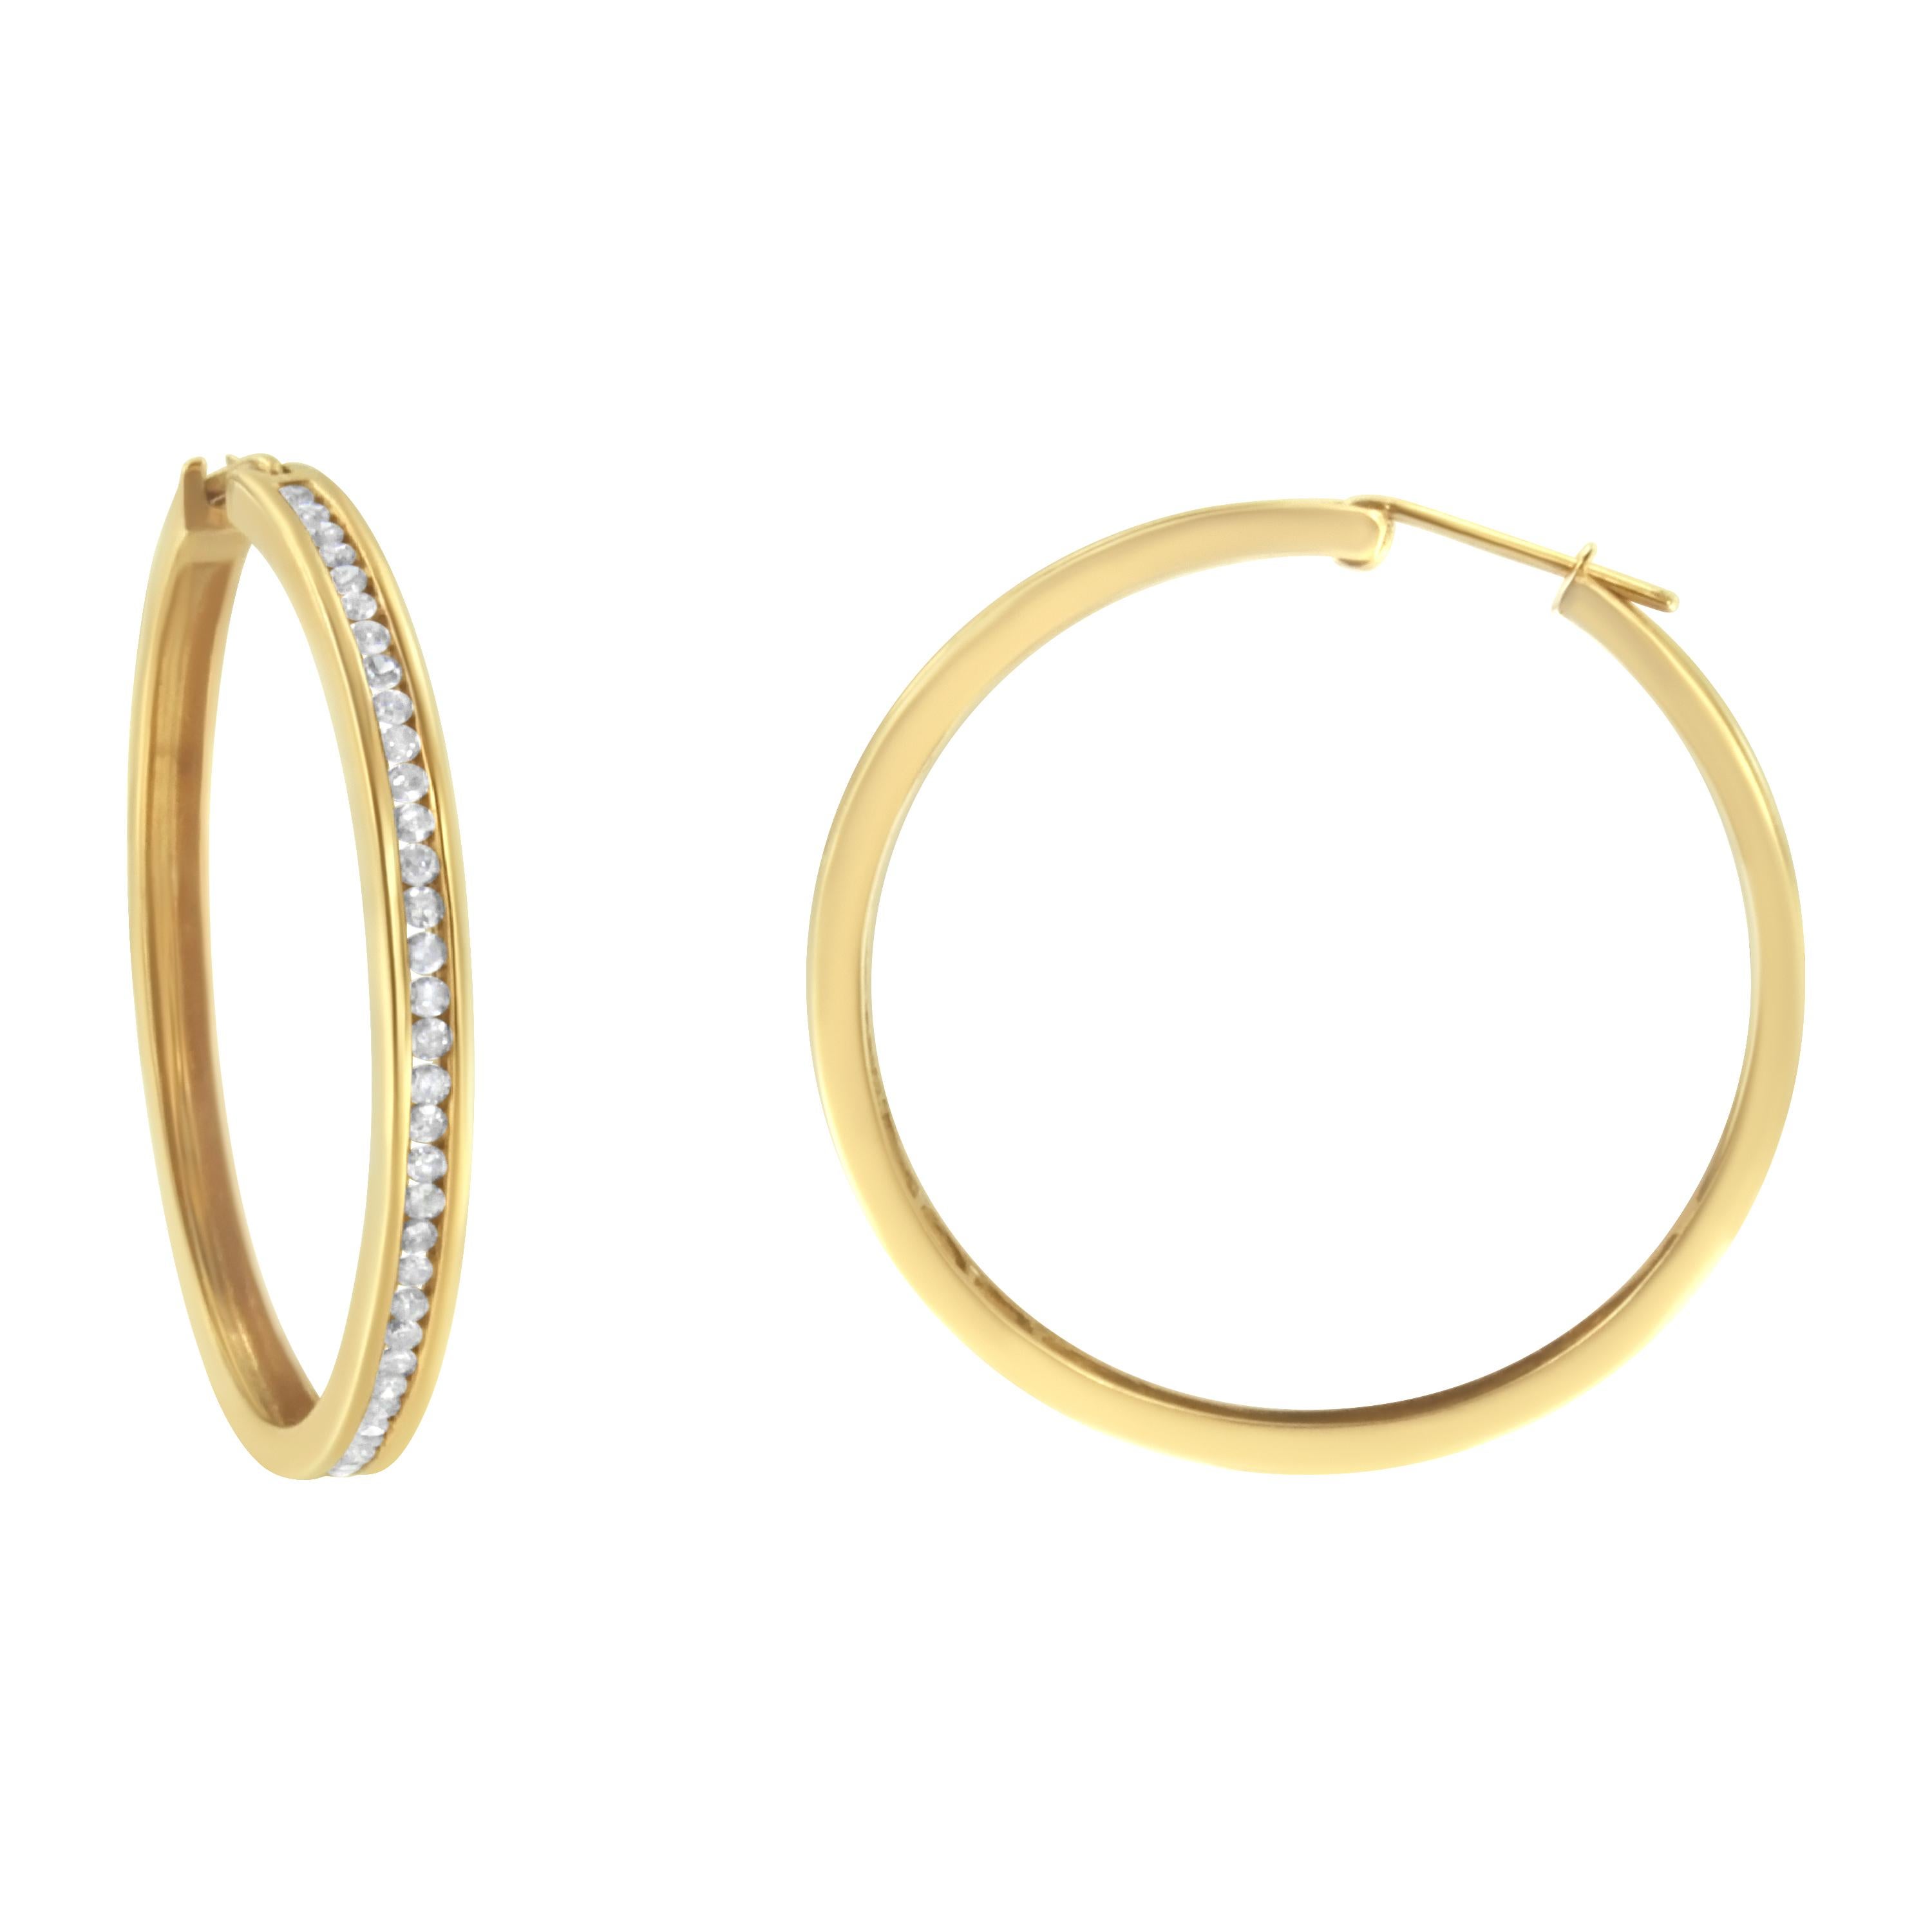 You can't go wrong with these classic 1ct TDW diamond hoop earrings. Sixty six channel set, round cut diamonds sparkle against the warm tone of this 10k yellow gold design. A clip on mechanism keeps the earrings secure. 